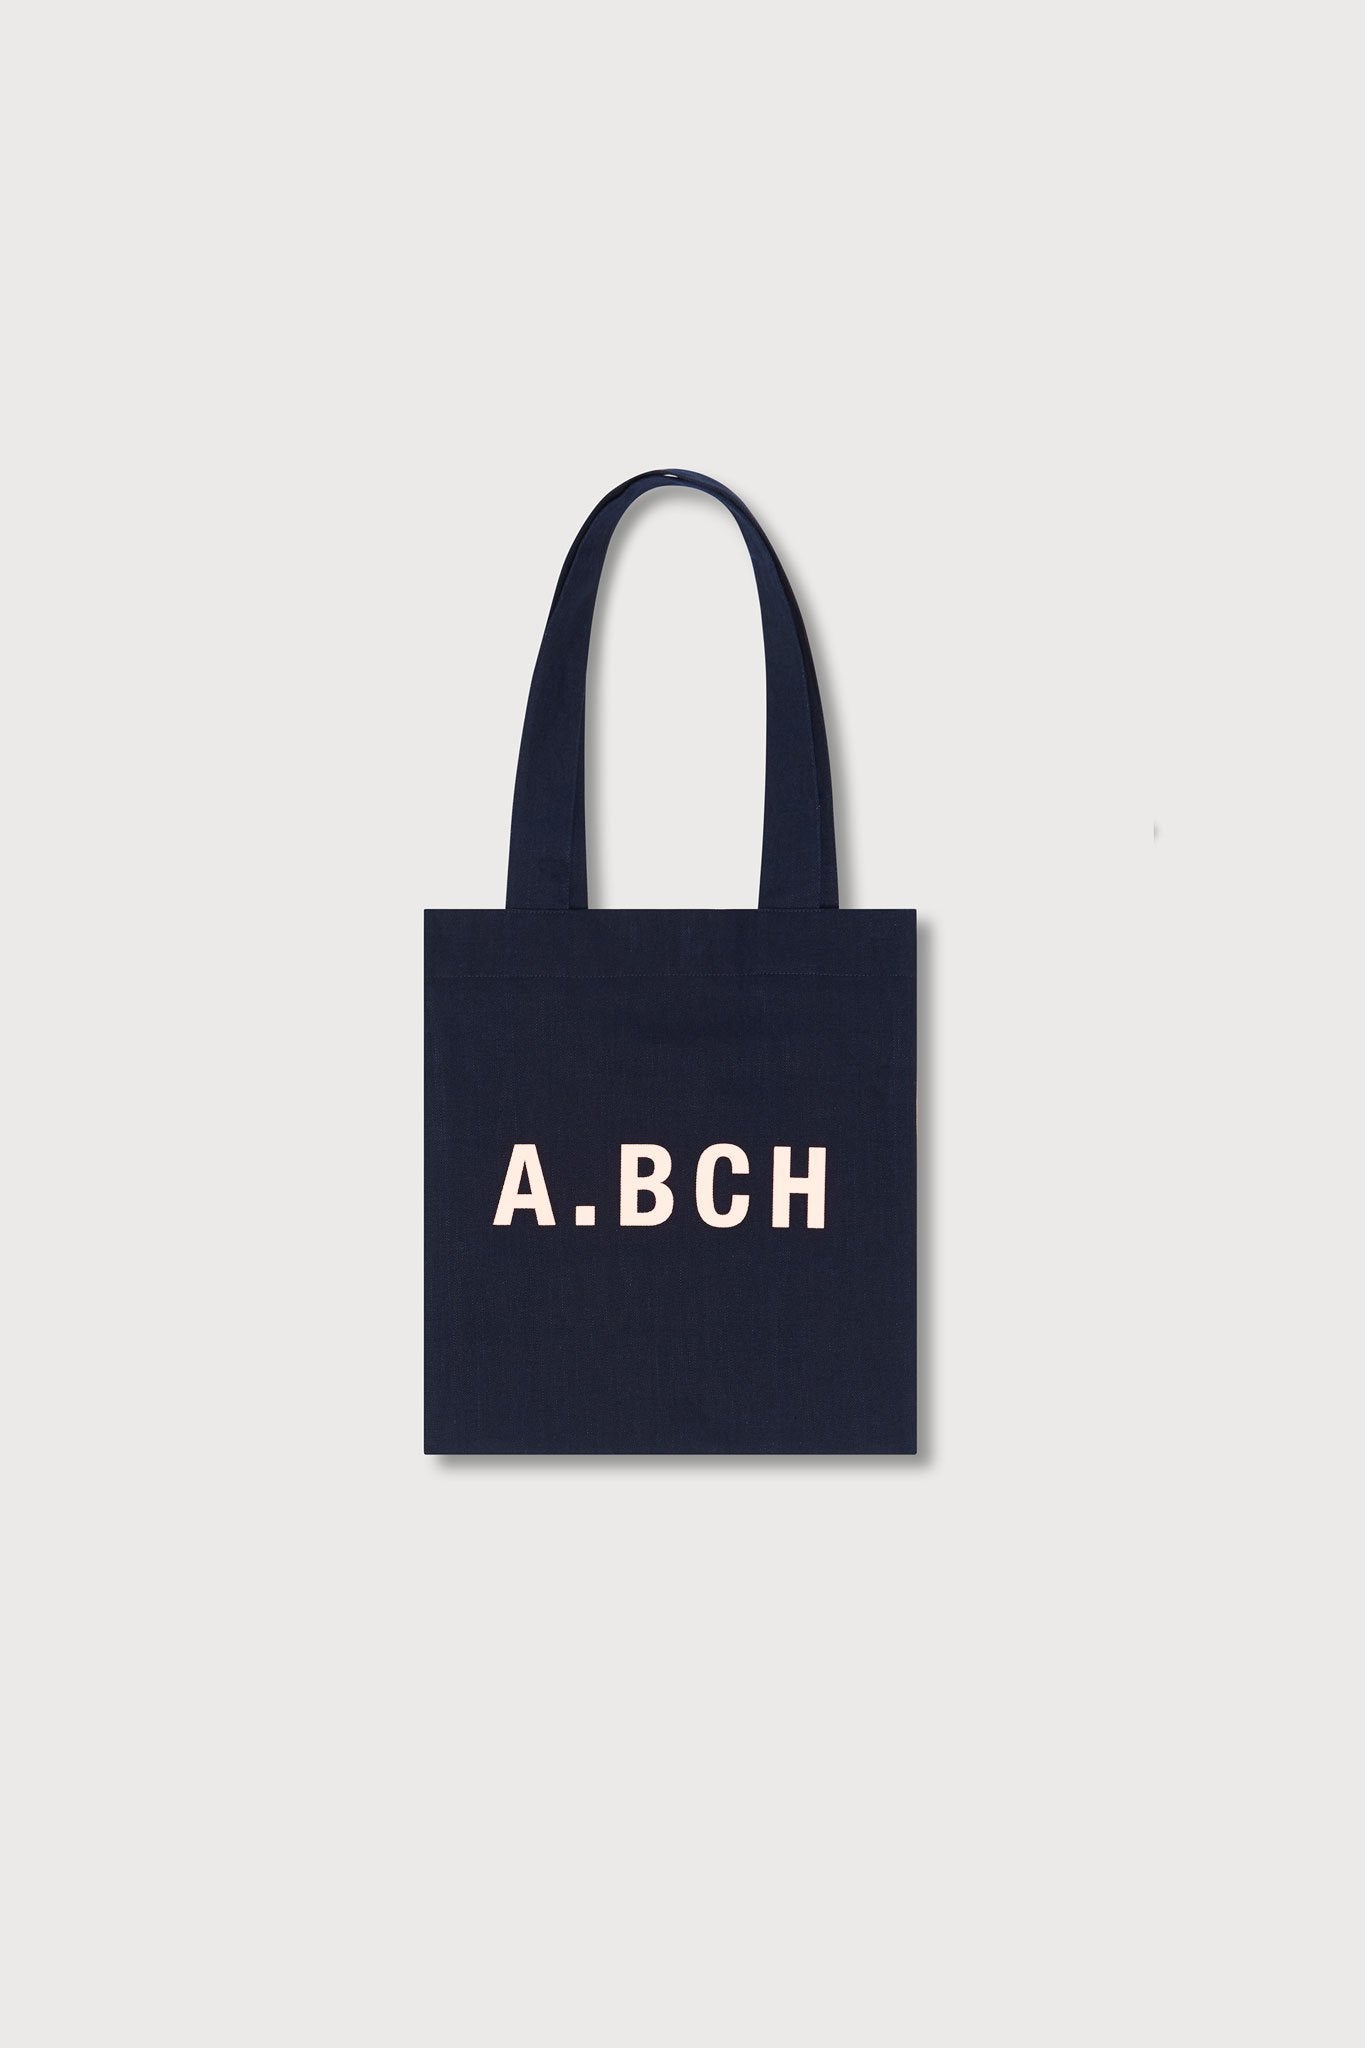 A.06 Organic Raw Denim Tote Bag with White Graphic | A.BCH